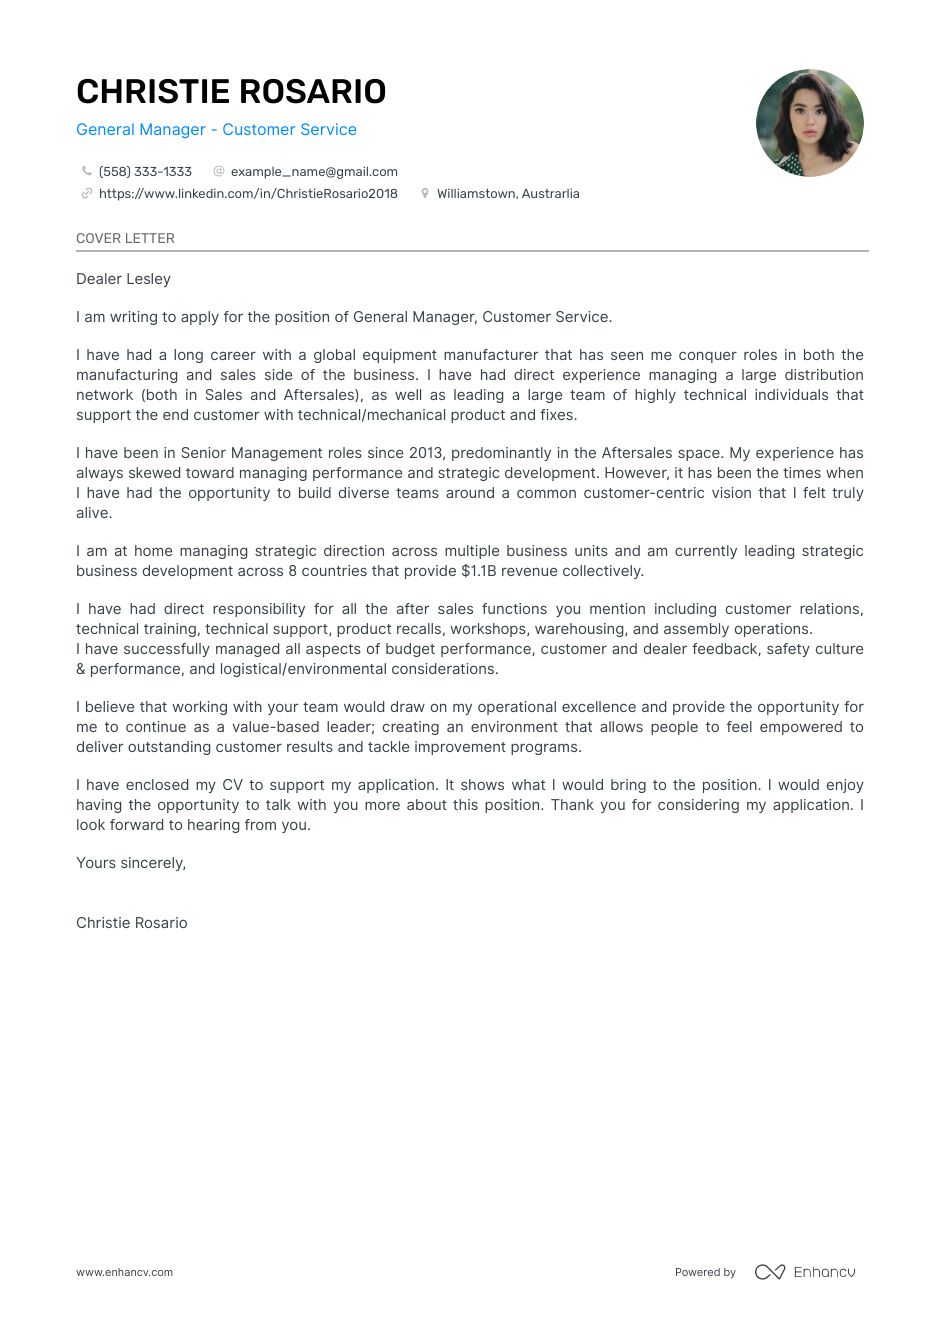 general-manager-coverletter.png